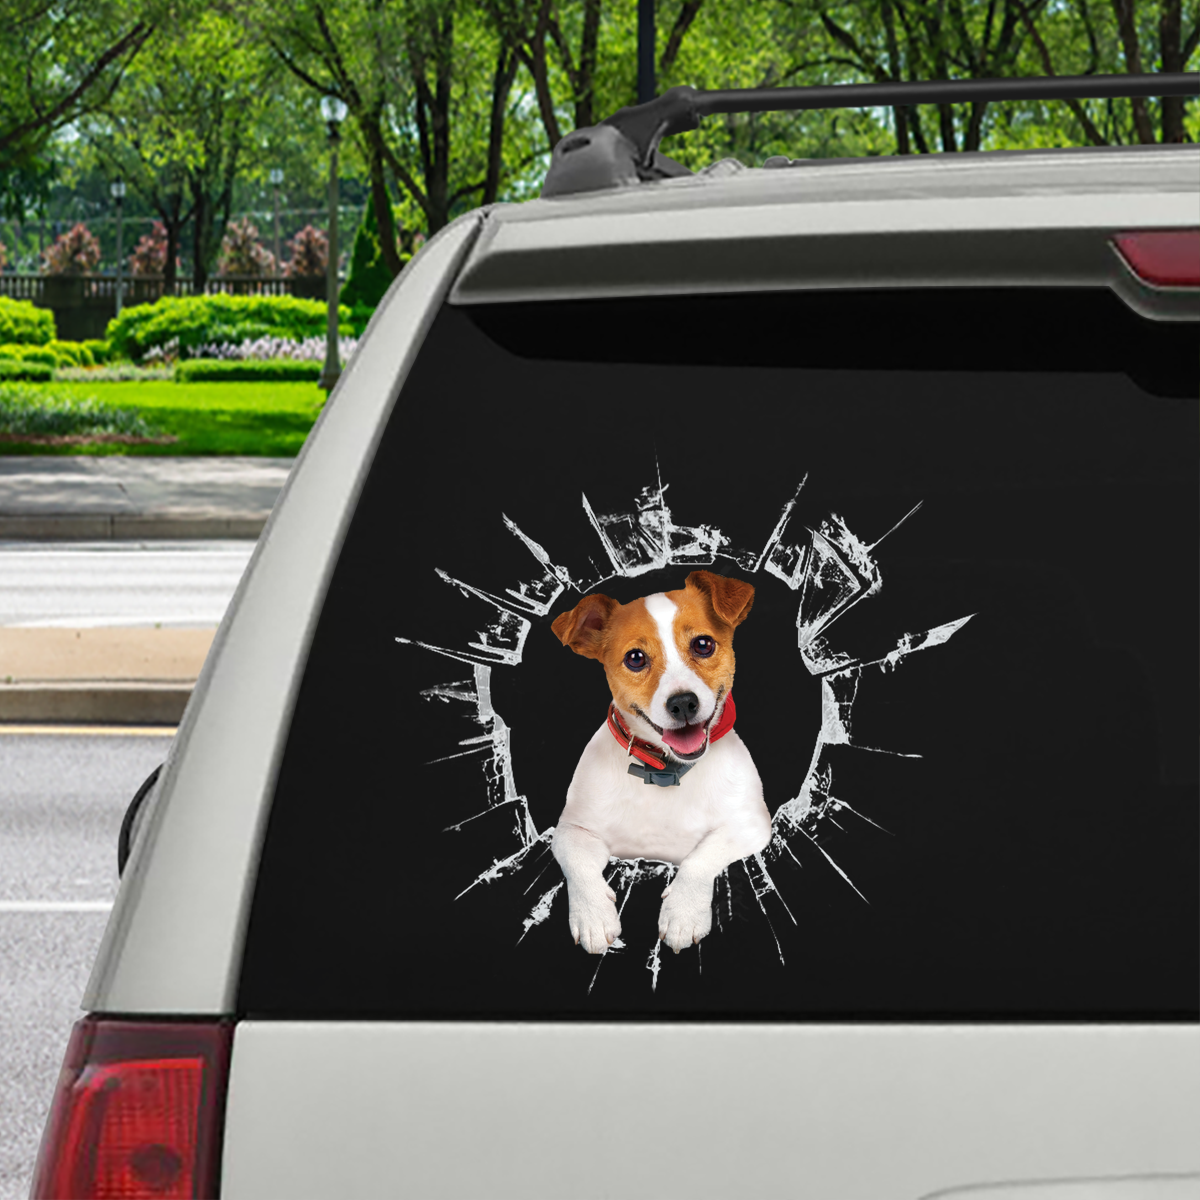 Get In - It's Time For Shopping - Jack Russell Terrier Car Sticker V1